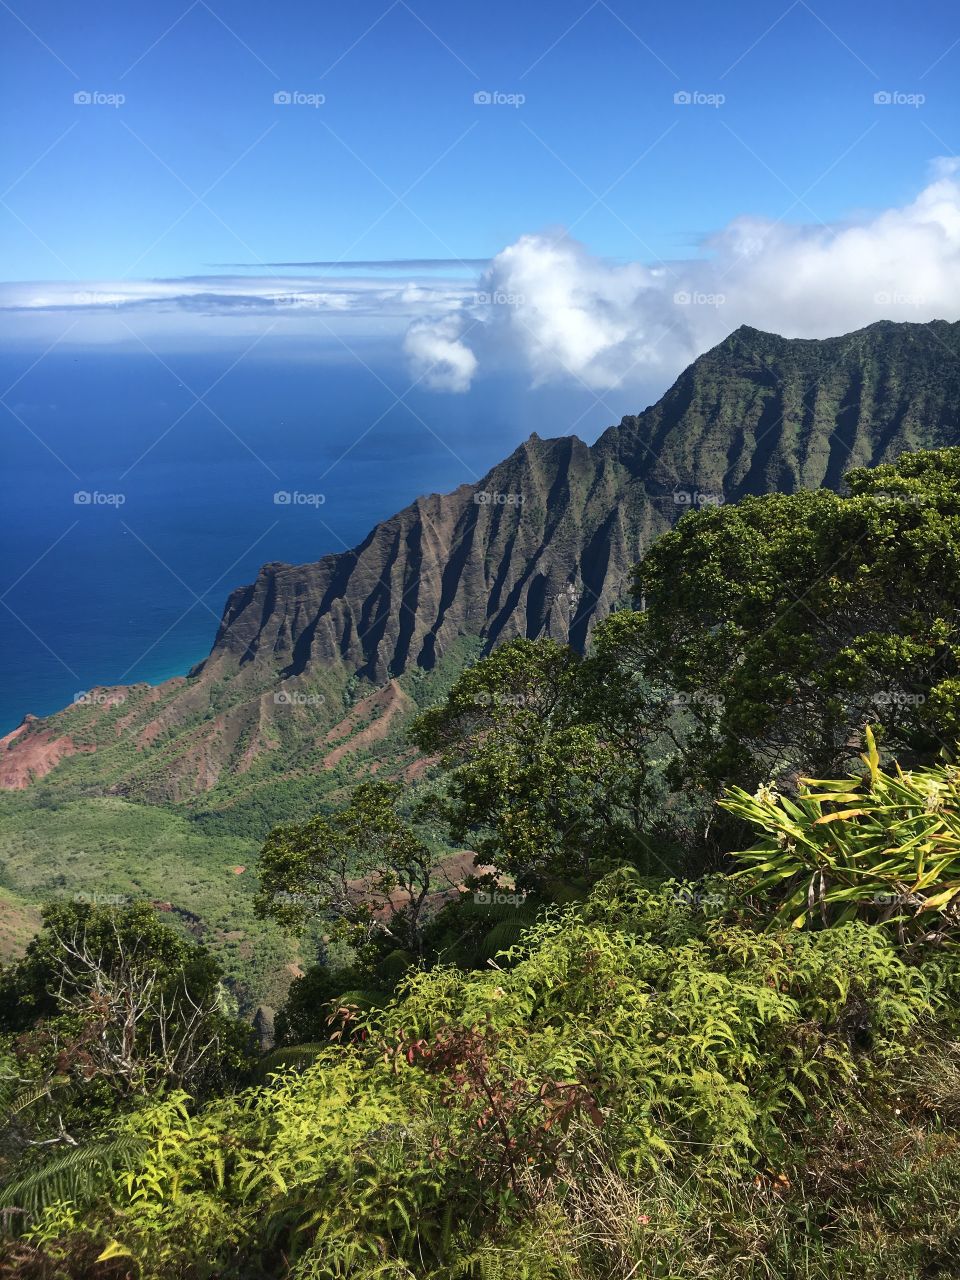 Views of the fluted ridges of the Kalalau range on the island of Kauai. Eroded mountaintops tower over the turquoise ocean below.